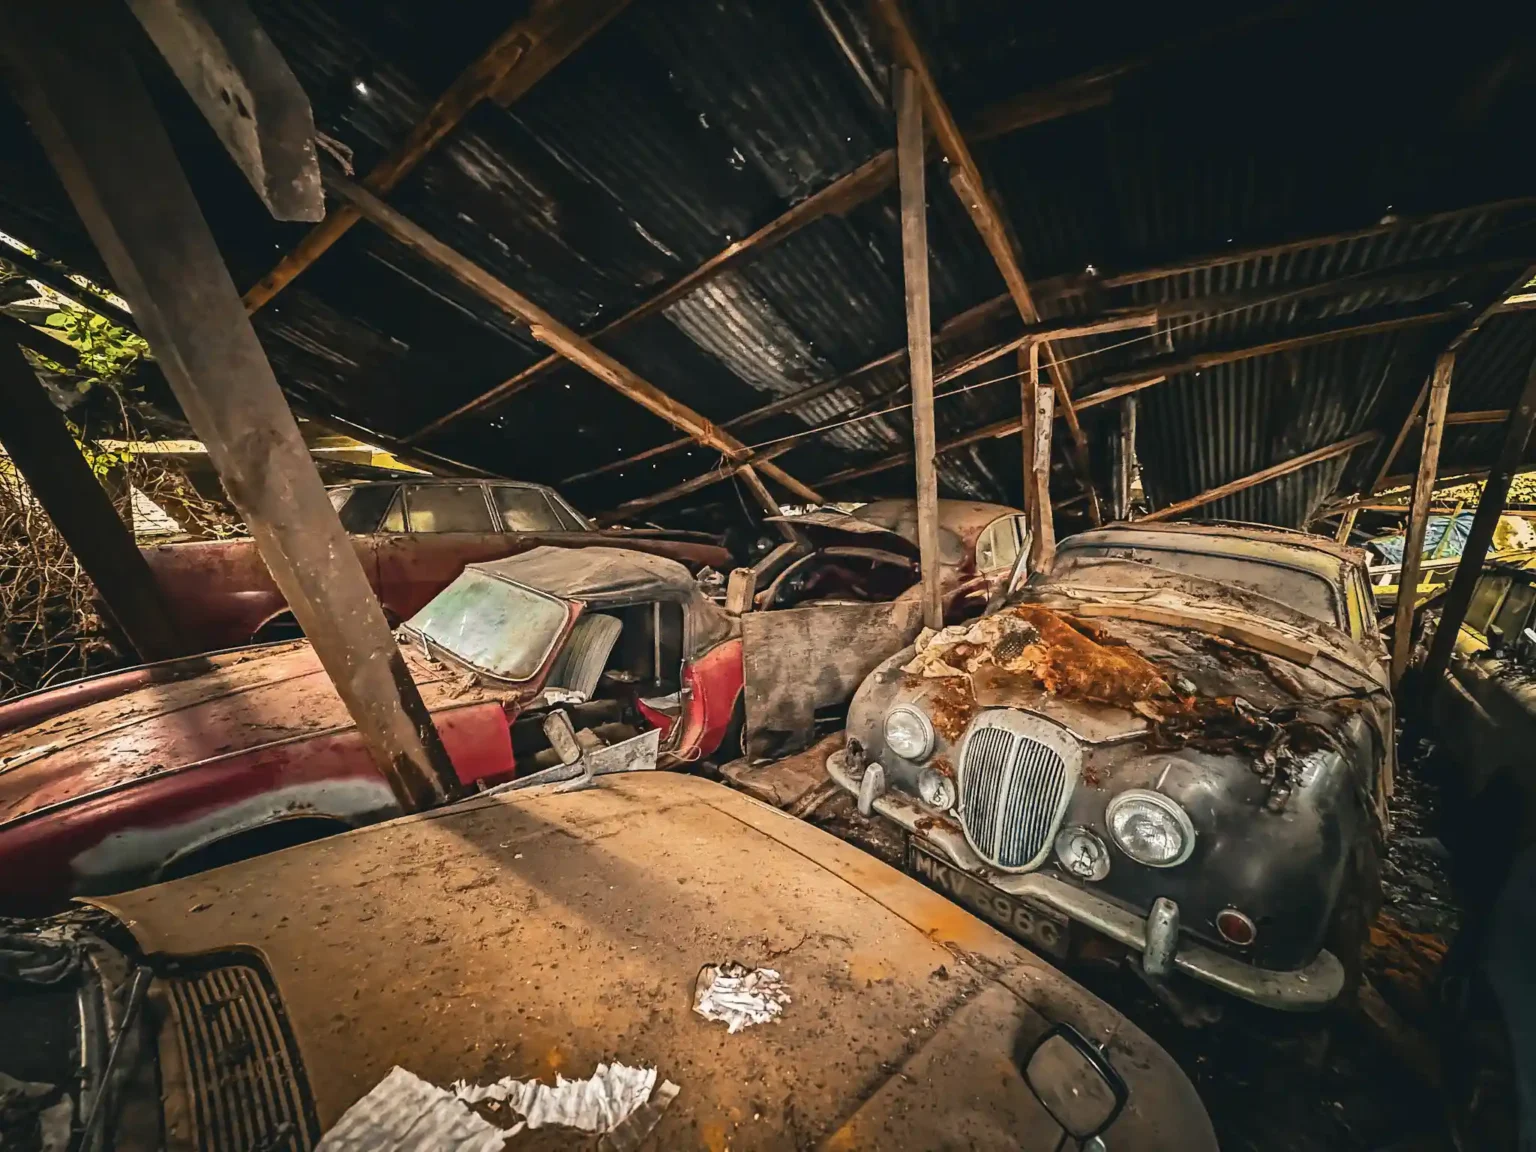 Explorer discovers vintage car graveyard in UK forest, with over 50 classic motors left to sadly rot. TikTok clip gains 35.4k views.